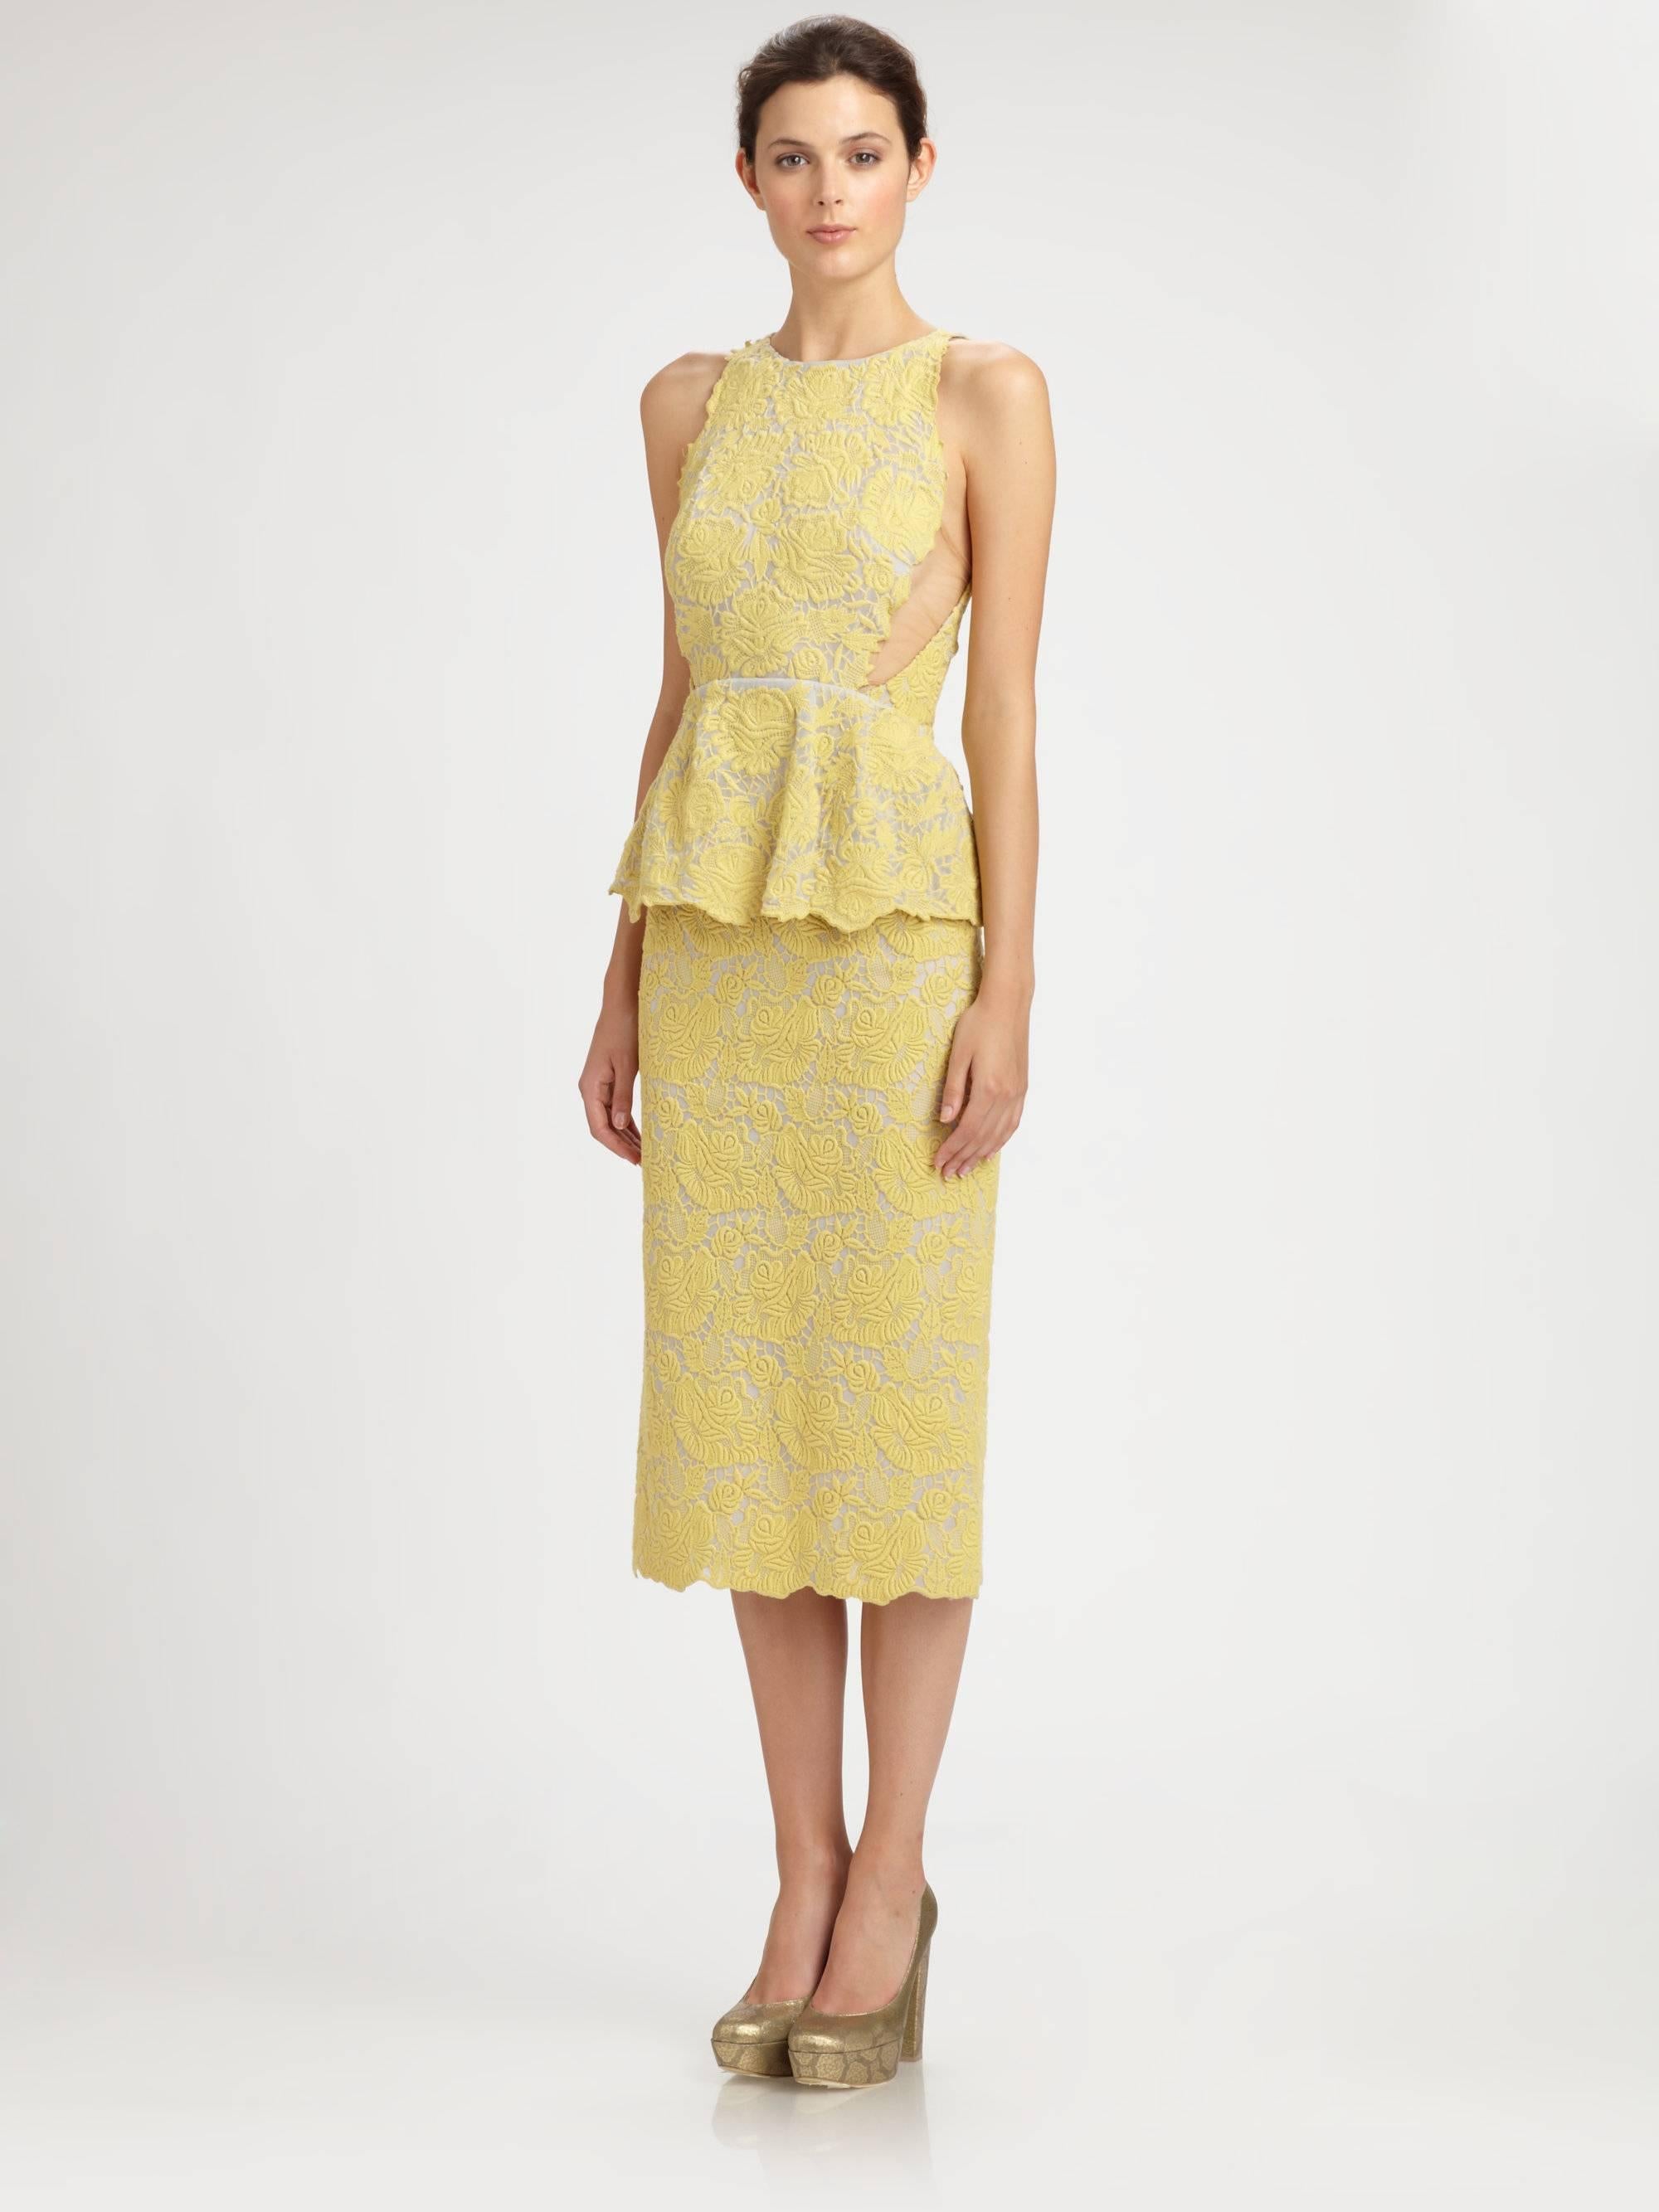 Stella McCartney Yellow Lace Peplum Cocktail Dress.  Sleeveless fitted bodice, nude mesh side panels, and fitted skirt. Centre back zipper, heavy yellow lace fabric, lined with light grey fabric. Tagged size IT 38 (USA 2 / 4).  Will fit 34